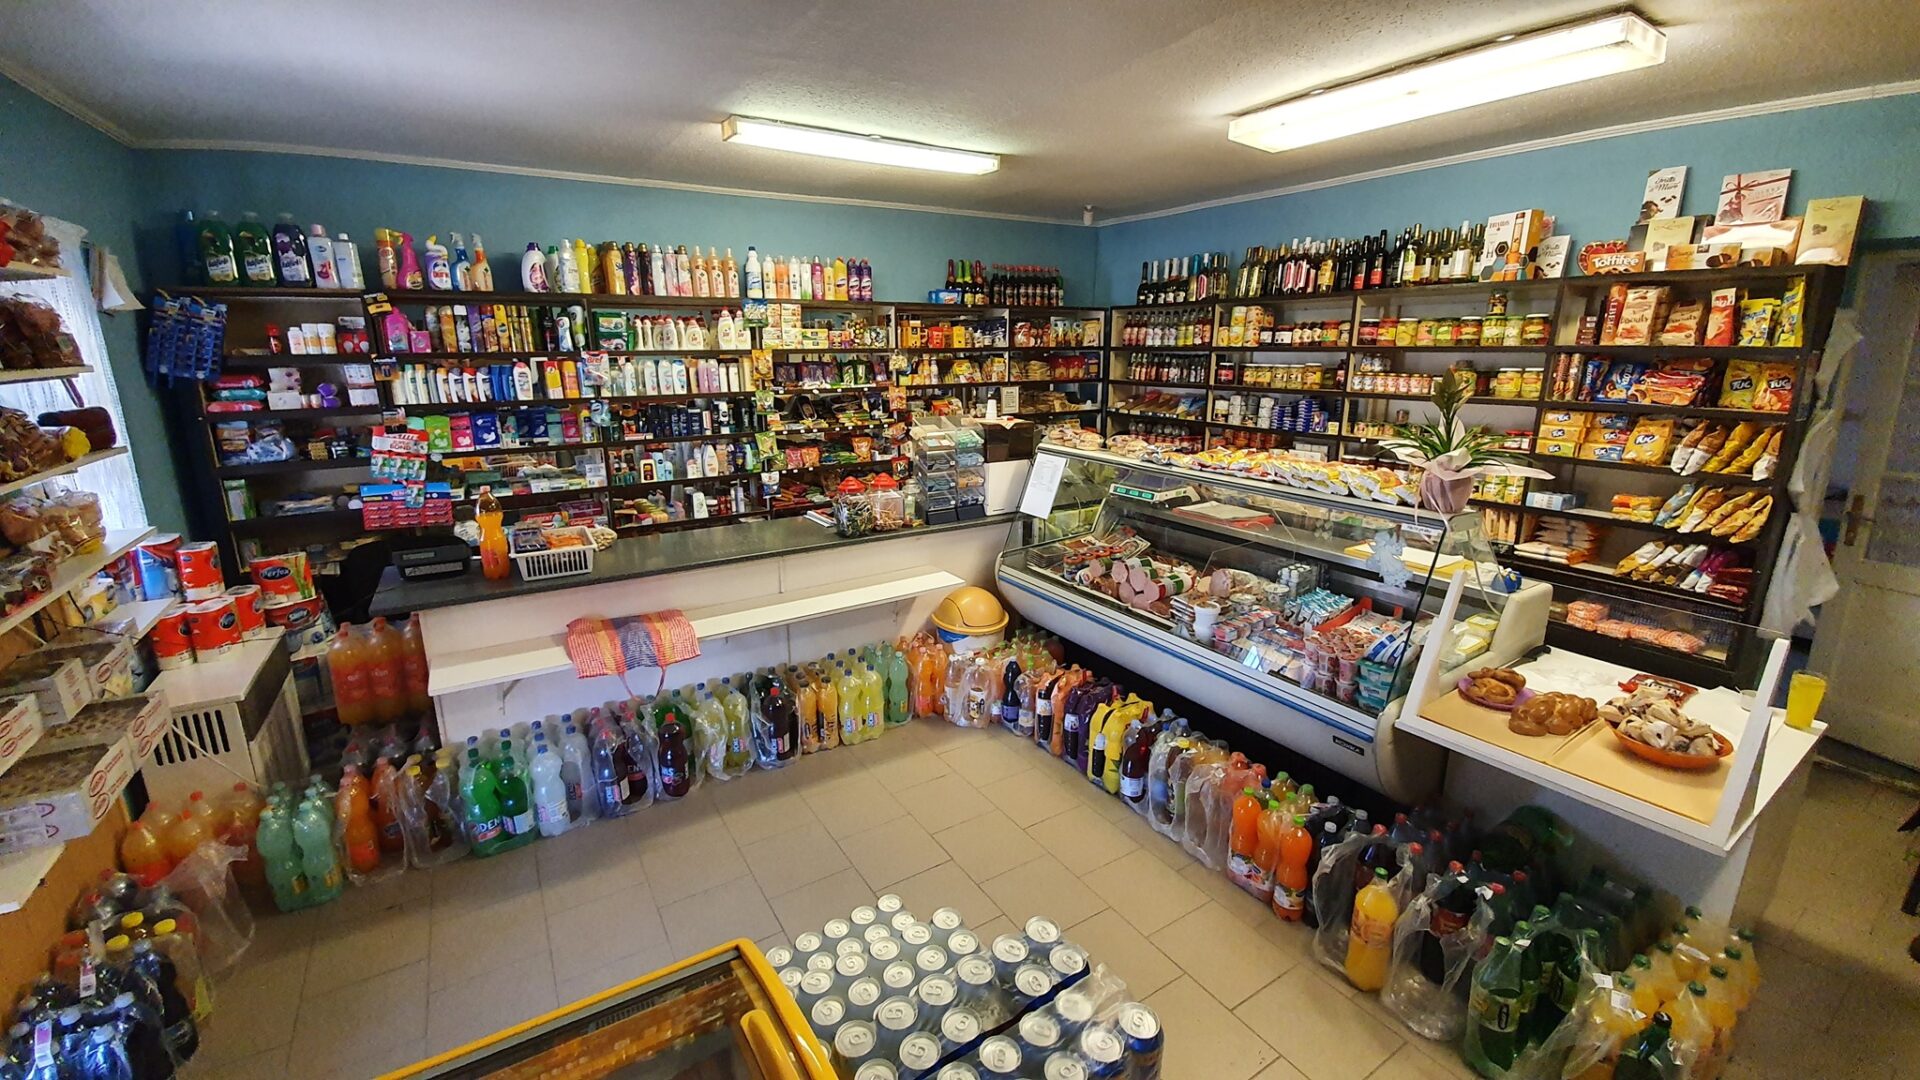 Interior of a typical local shop in Hungary